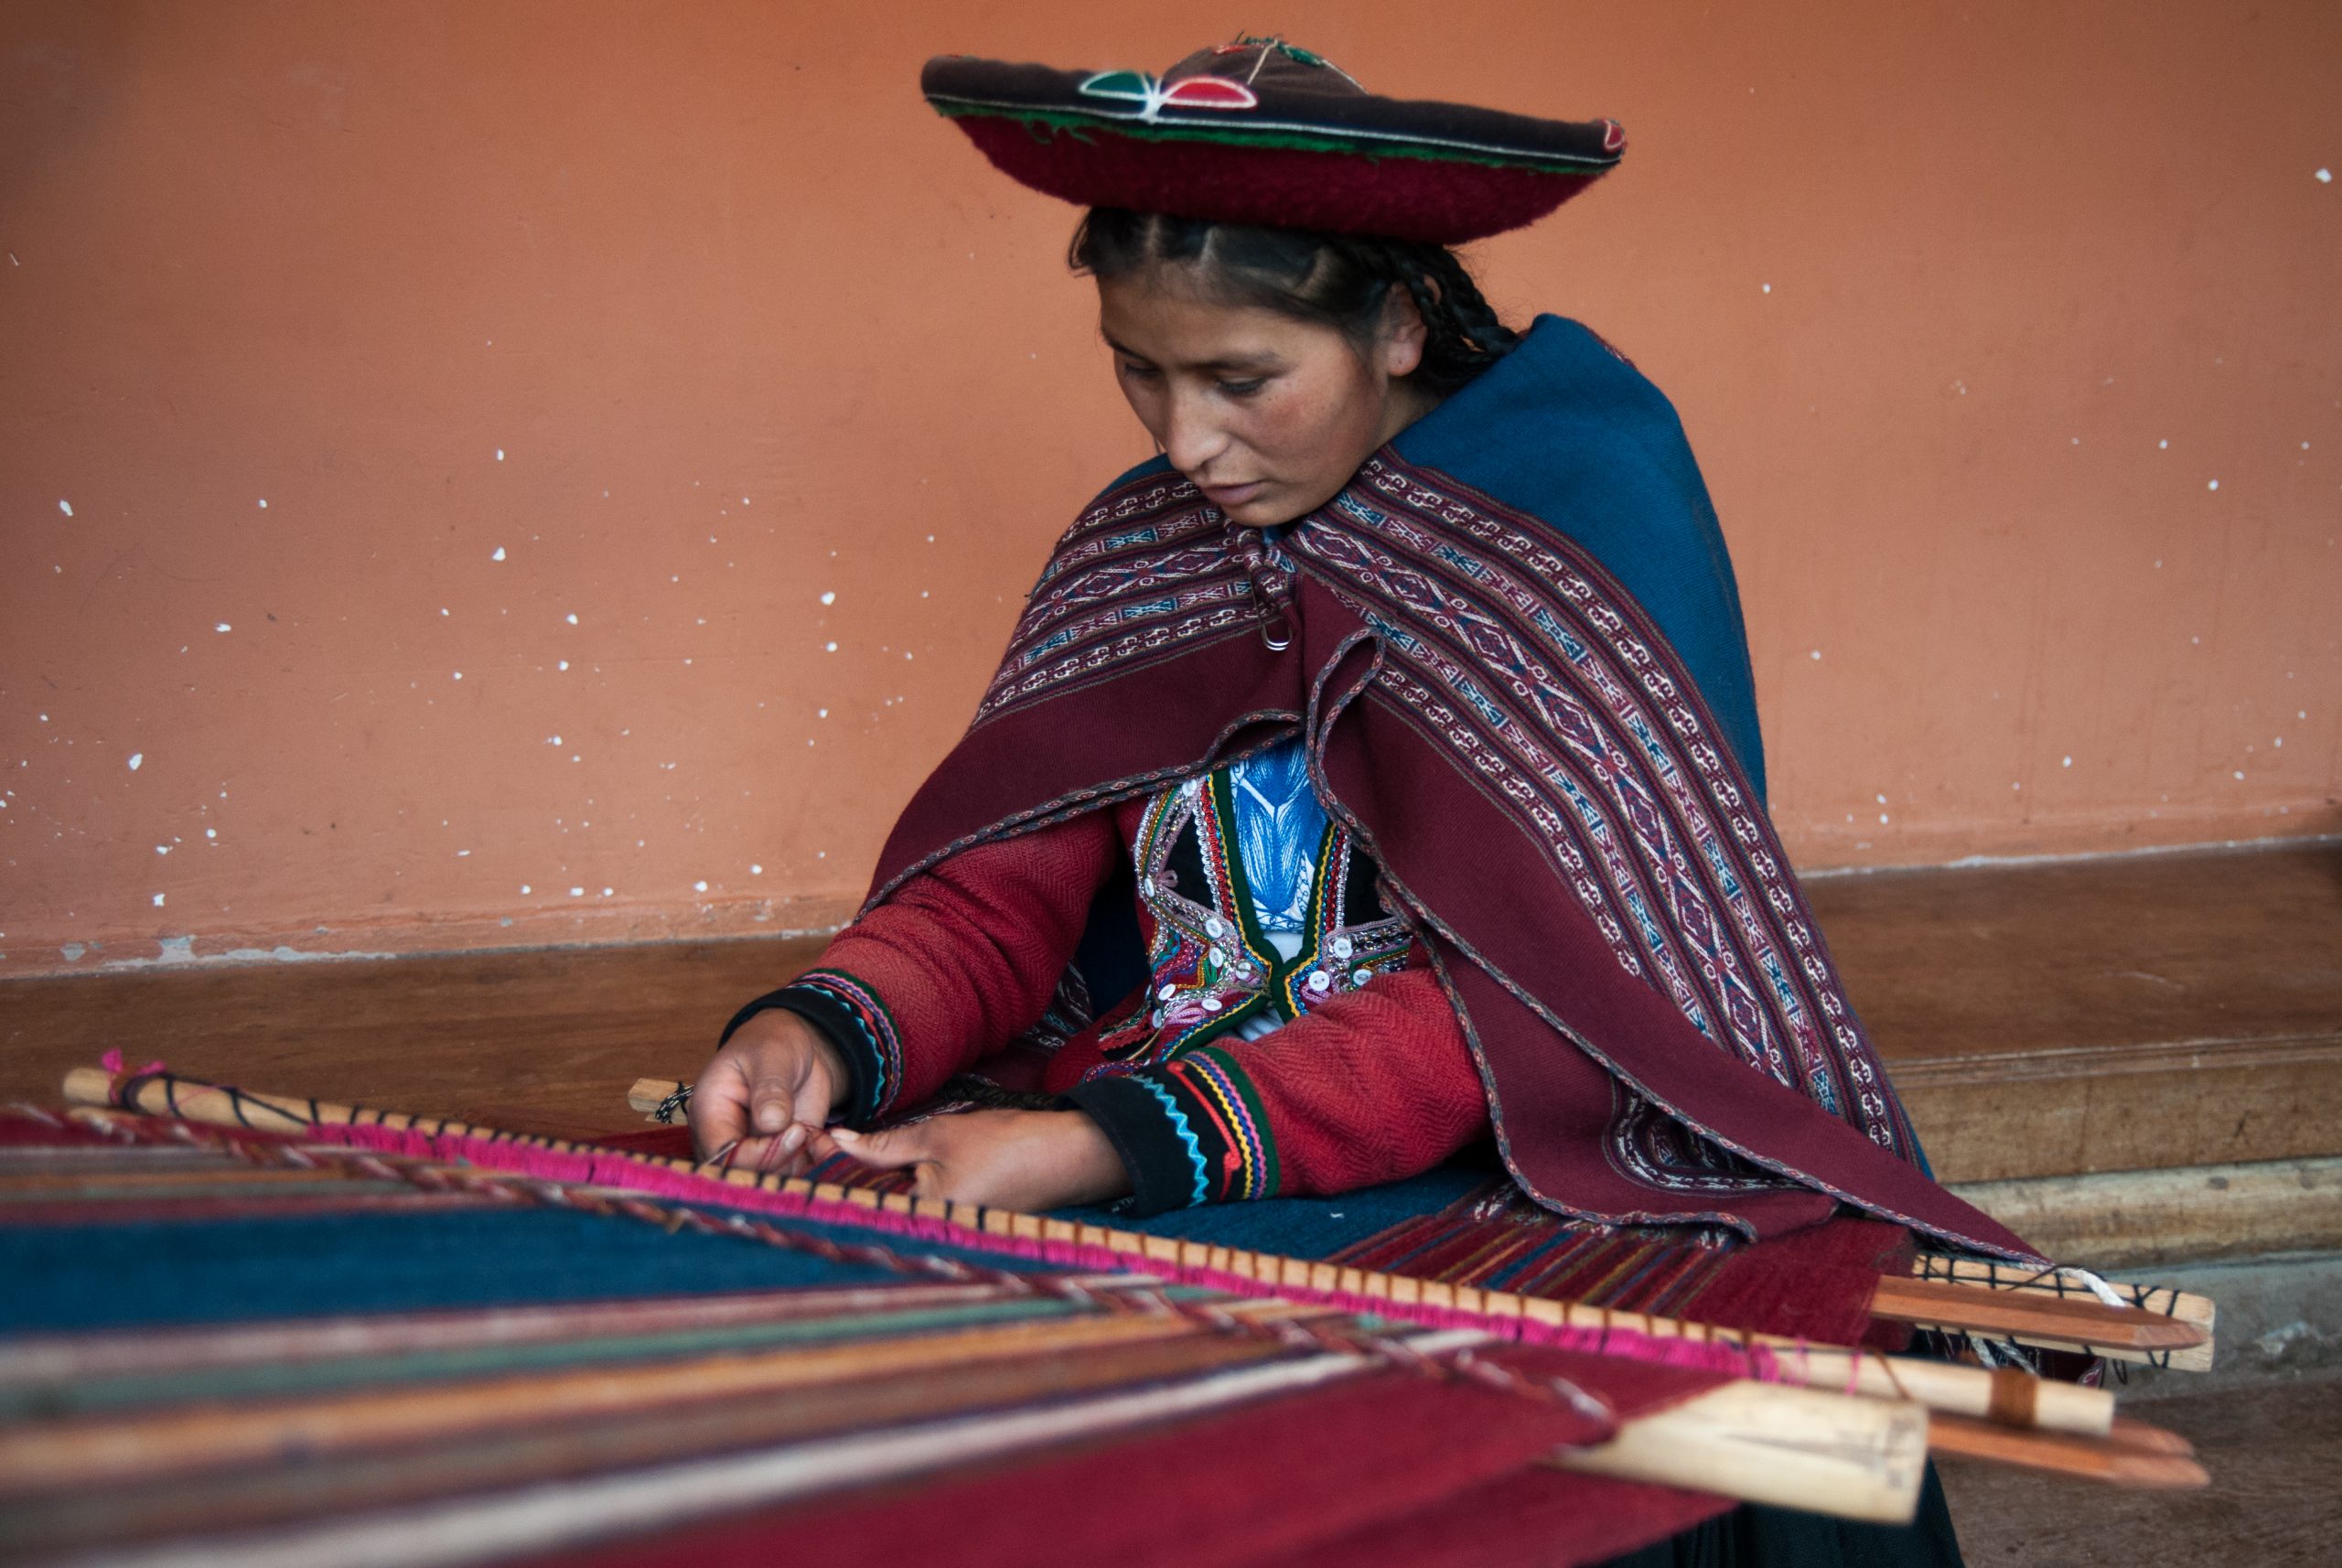 A woman at the Chinchero Weaving Collective works on a loom